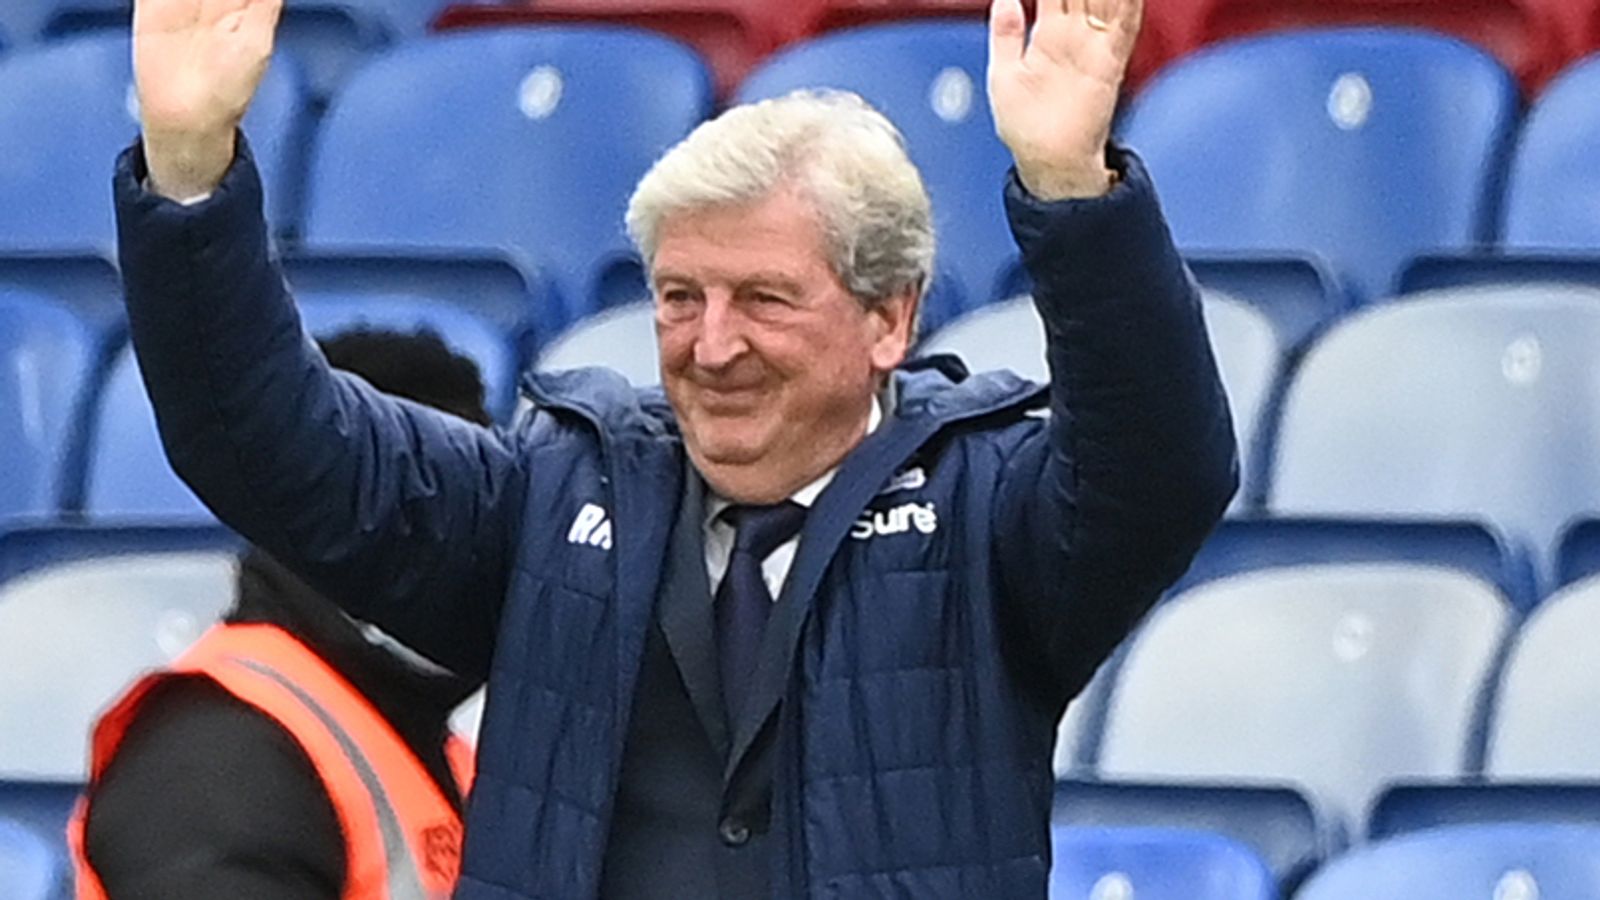 Crystal Palace appoint Roy Hodgson as manager until end of season | Football News